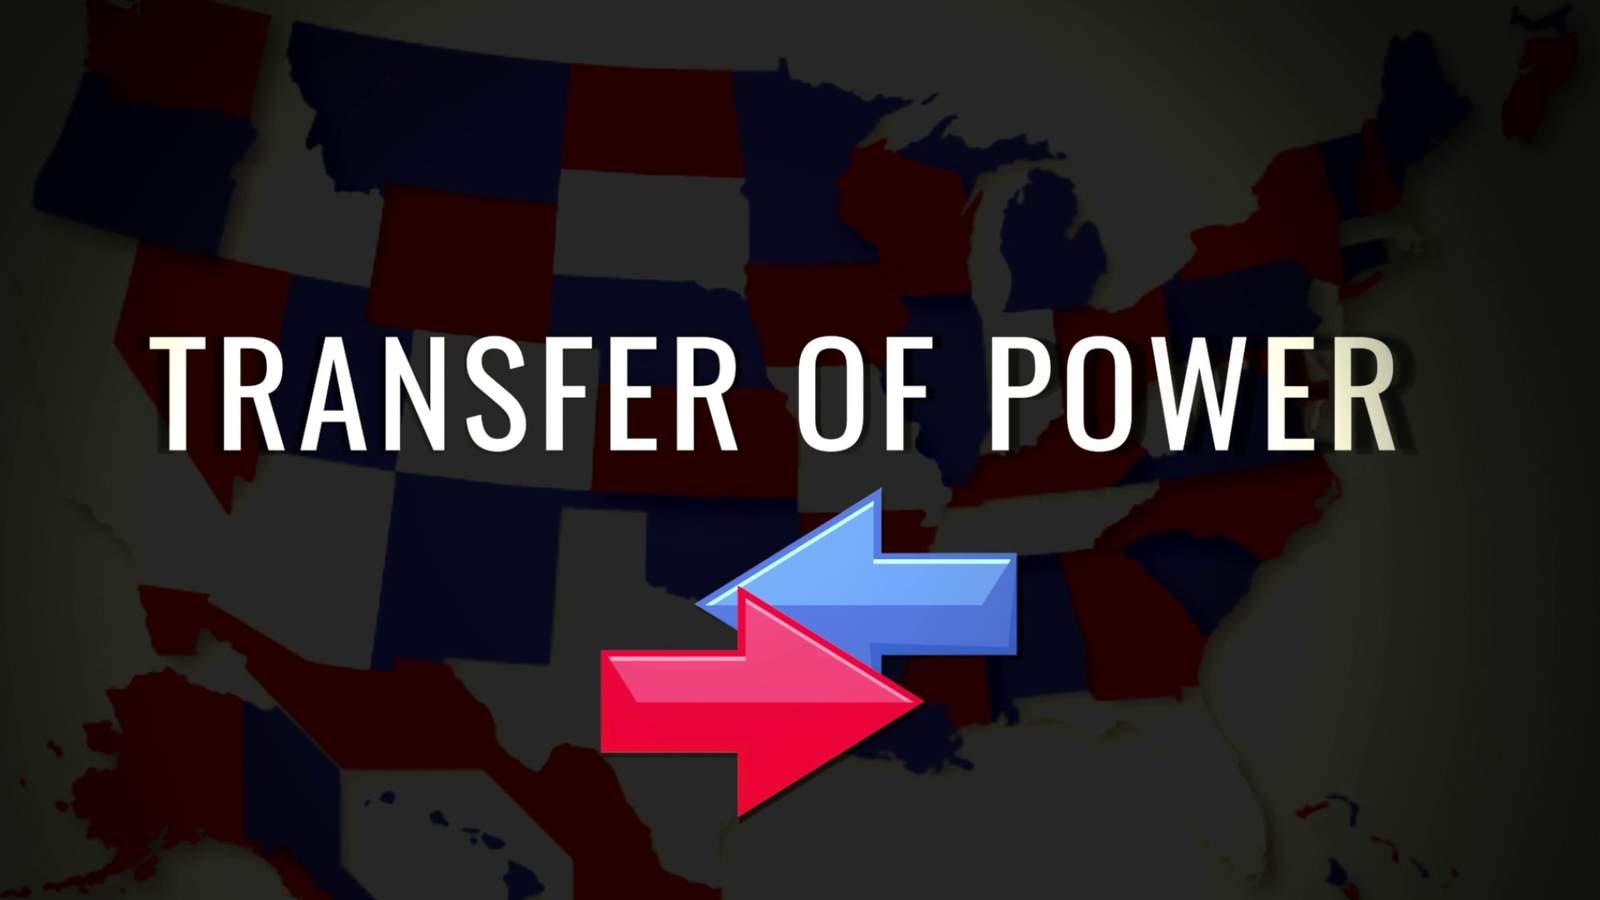 Presidential transfer of power: Here’s what to know